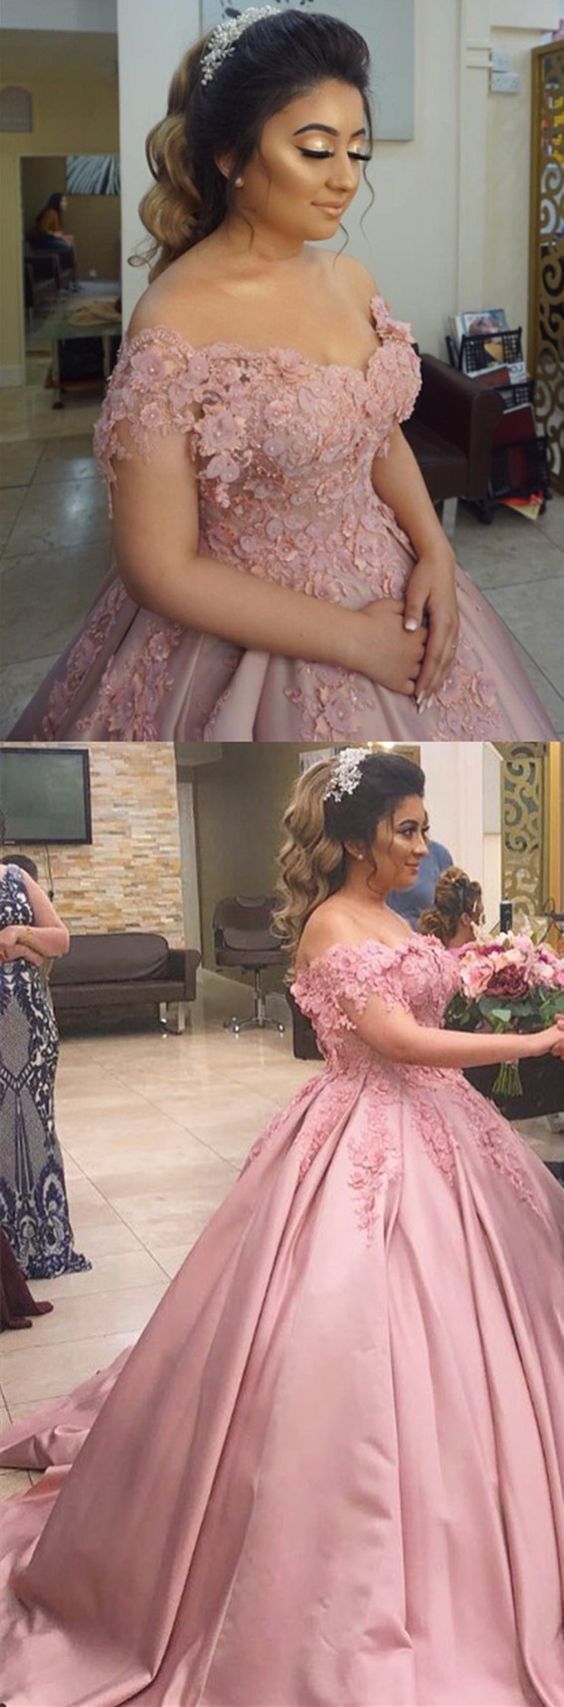 Charming Off Shoulder Pink Appliques Ball Gown Prom Dress   cg13171